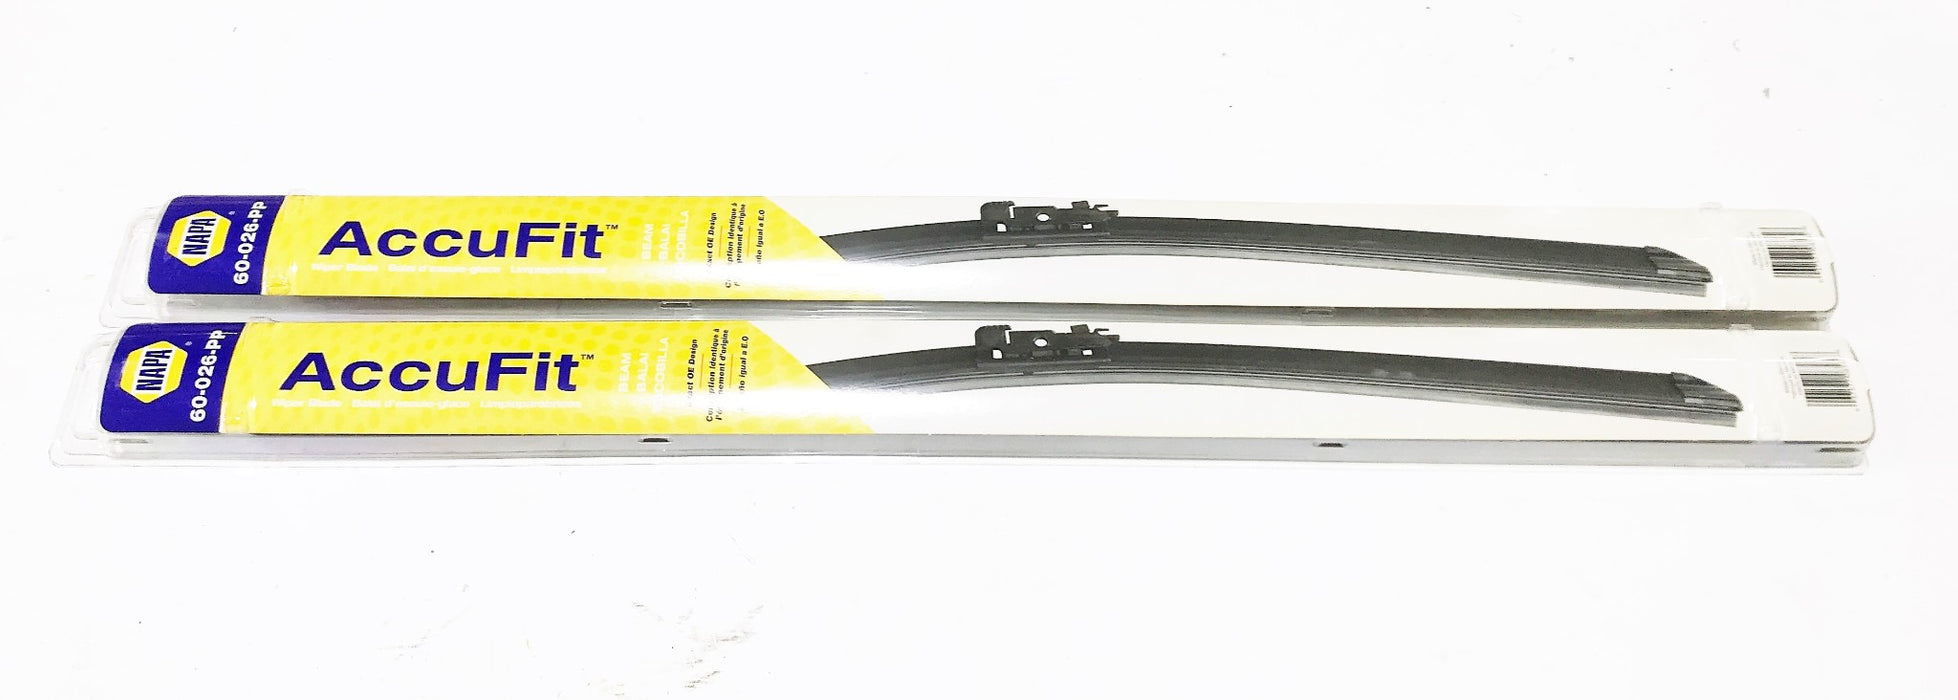 NAPA "AccuFit" Windshield Wiper Blade 60-026-PP [Lot of 2] NOS